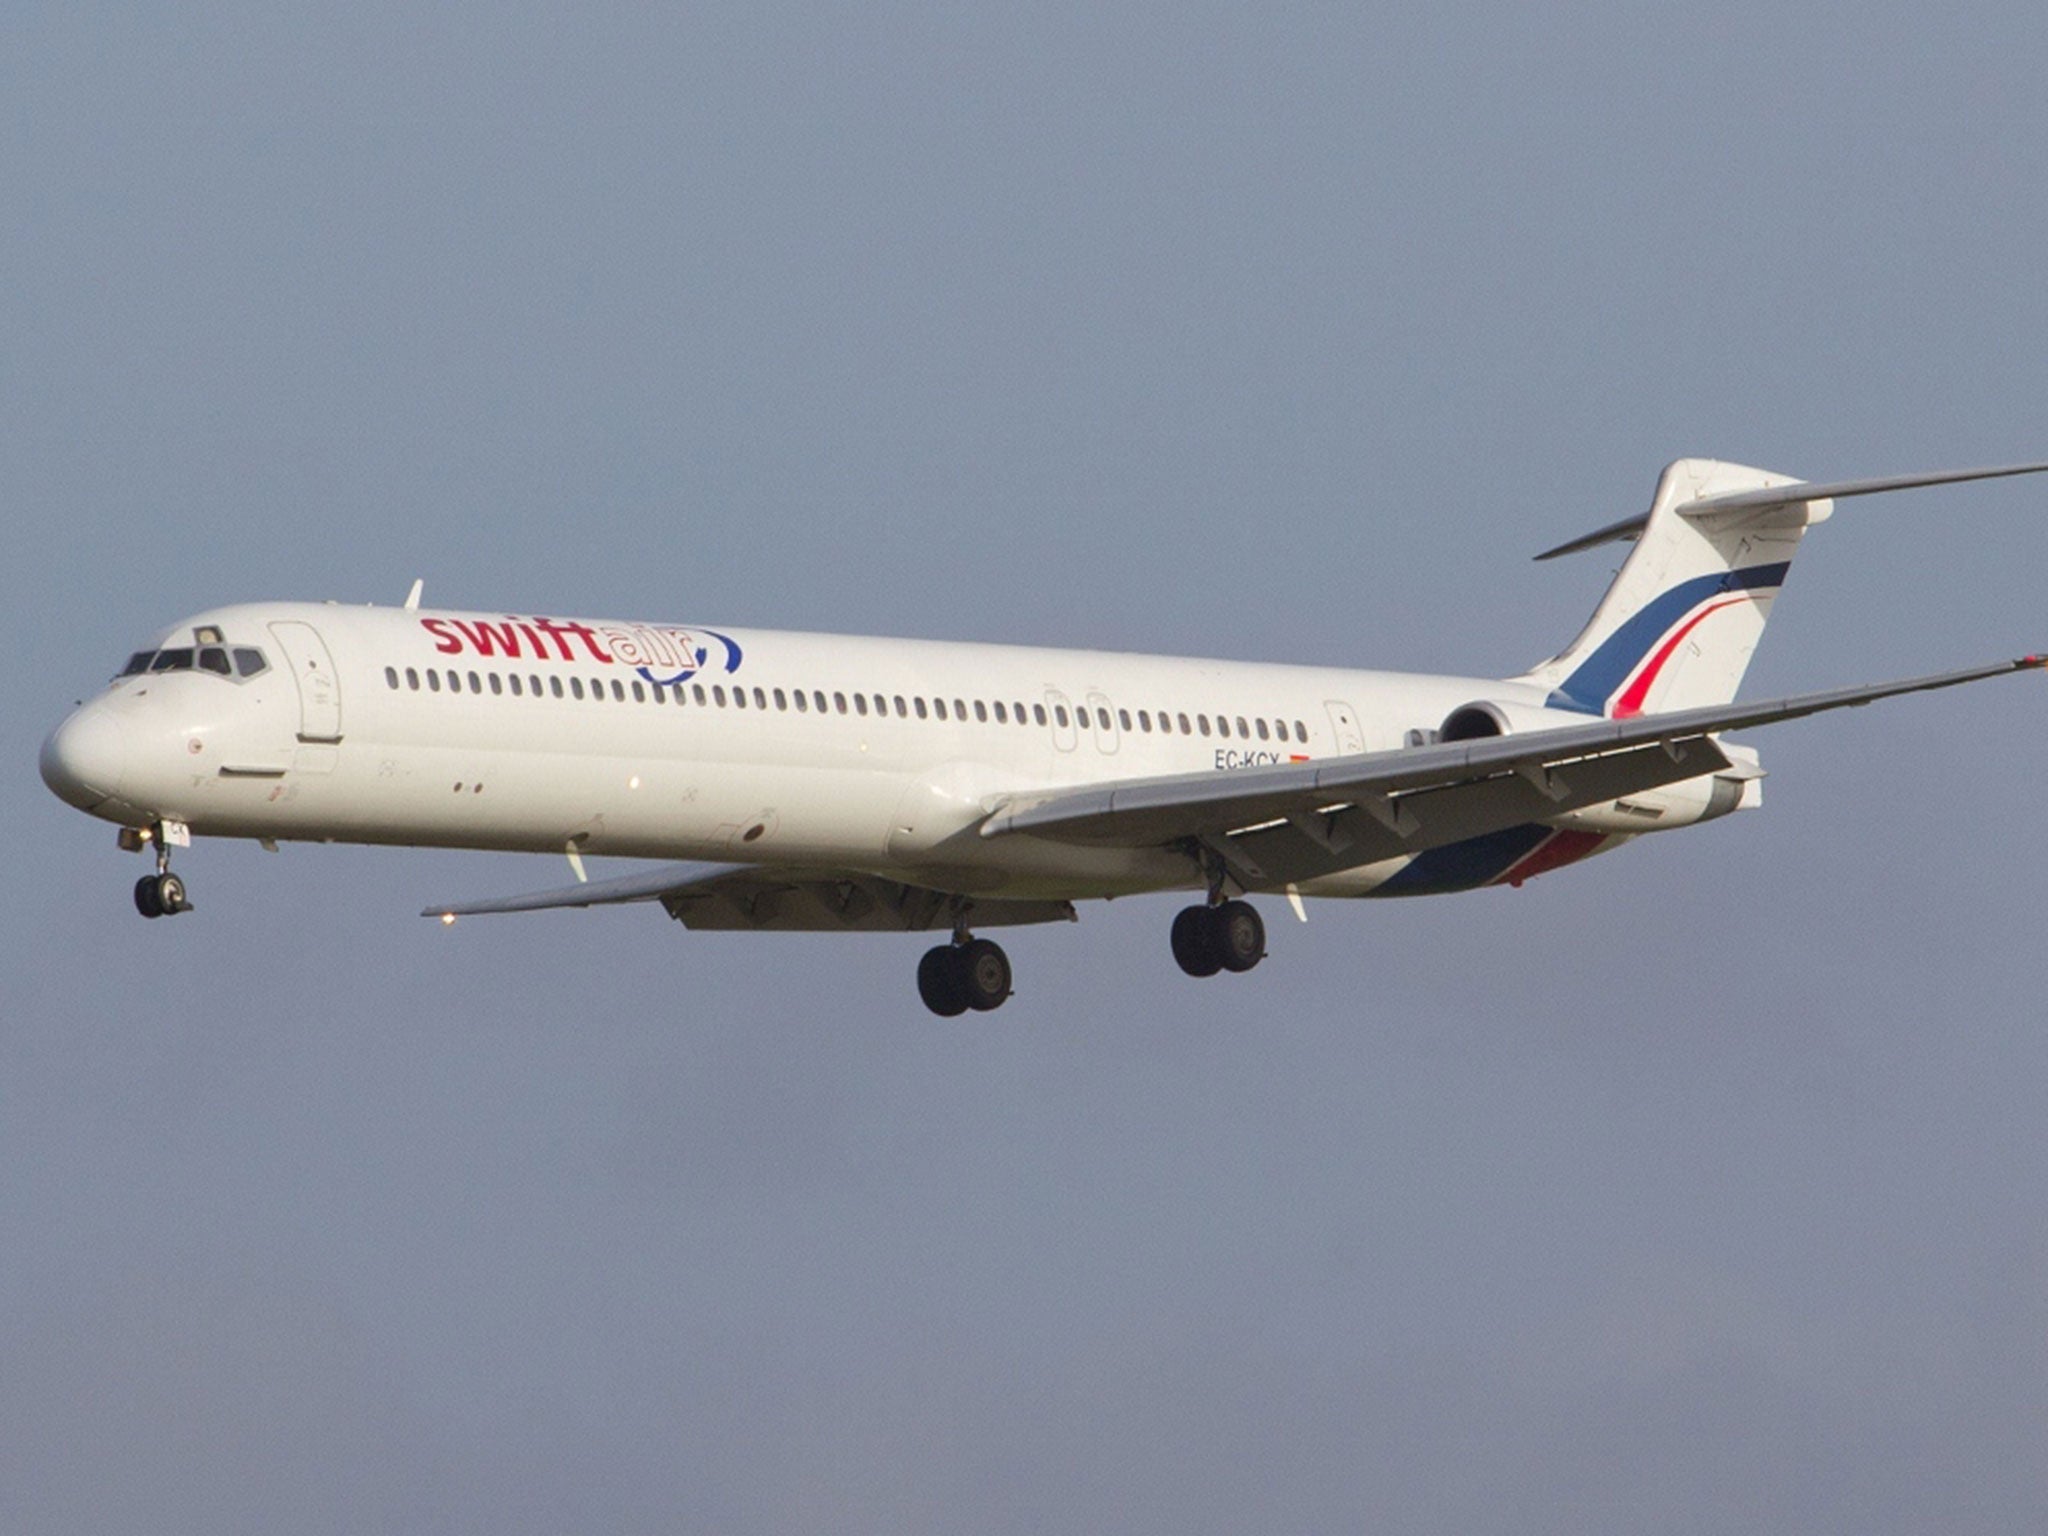 A file picture of a Swiftair MD83. the plane is chartered from Spanish airline Swiftair, who said 110 passengers and six crew are believed to be on board the MD83 aircraft.